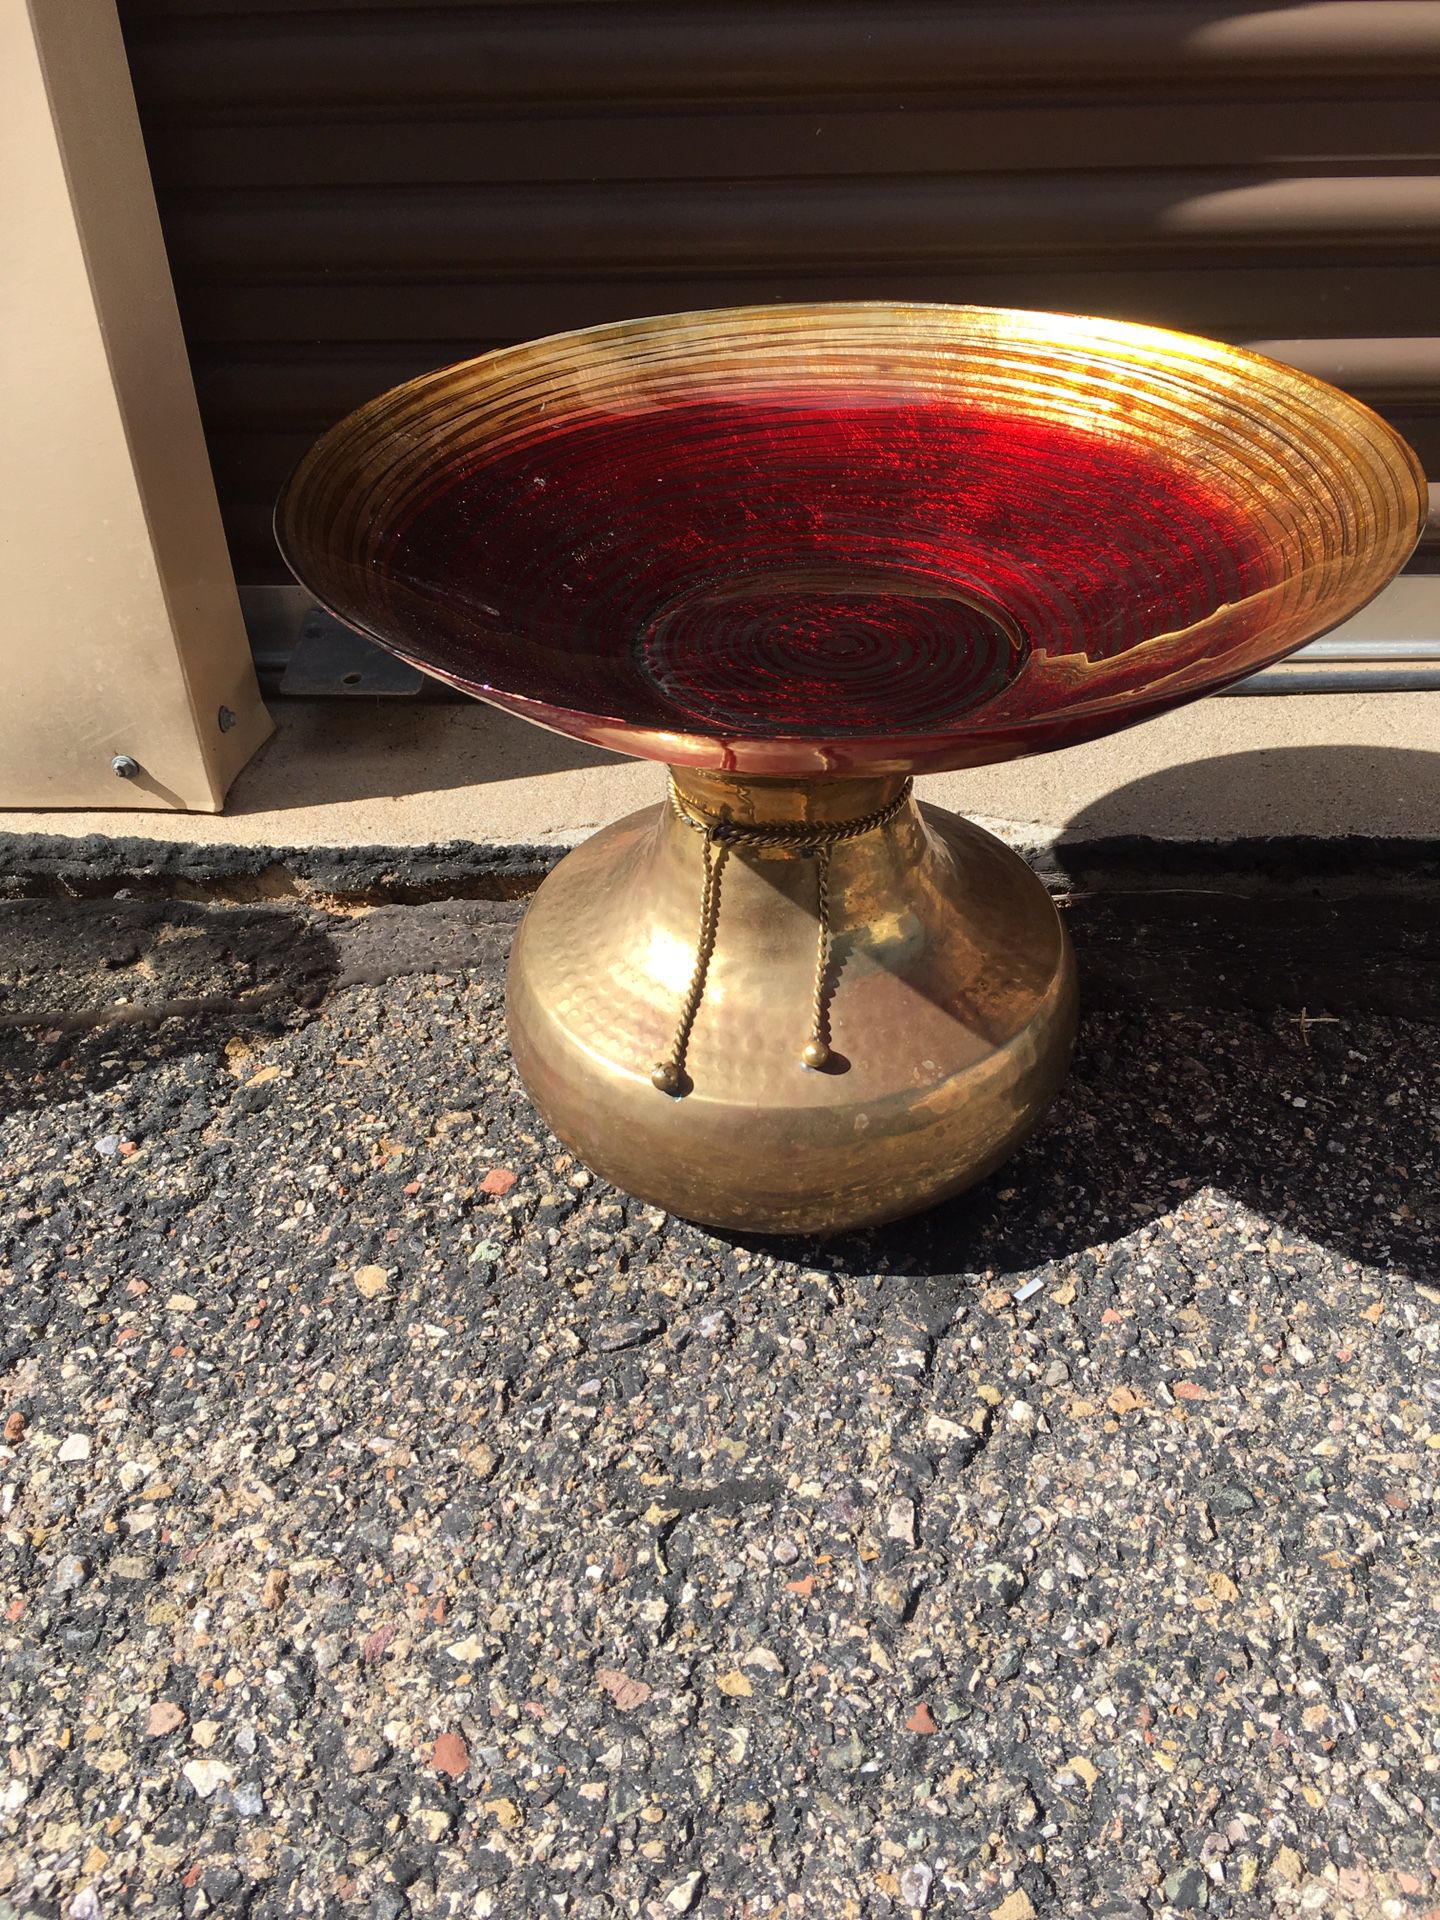 Bird Bath or hummingbird Feeder. Red and gold glass dish with copper base